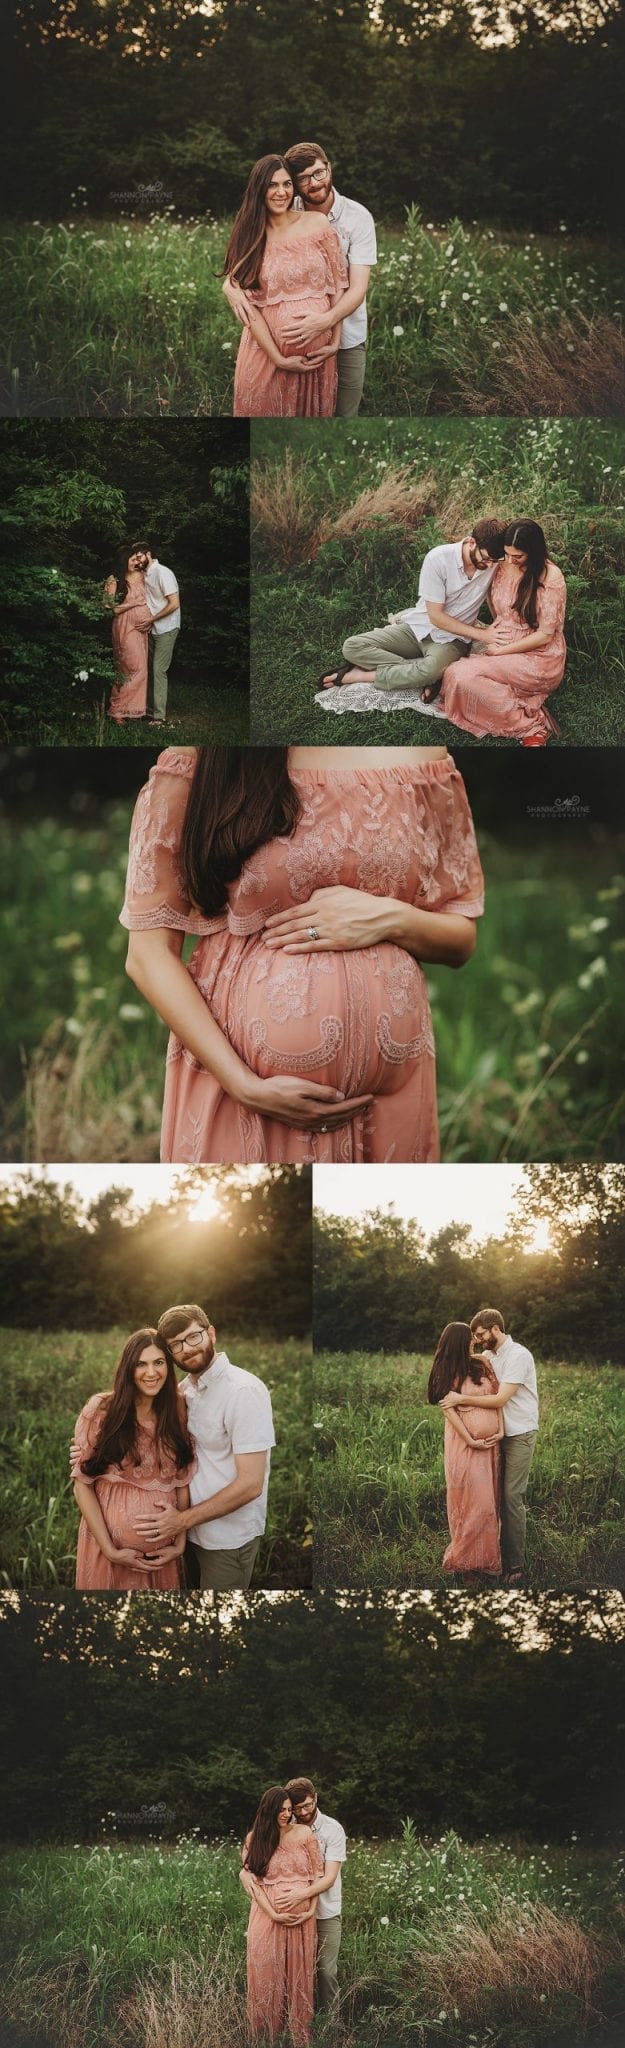 nashville_maternity-1-scaled 5 Tips for Great Maternity Photos